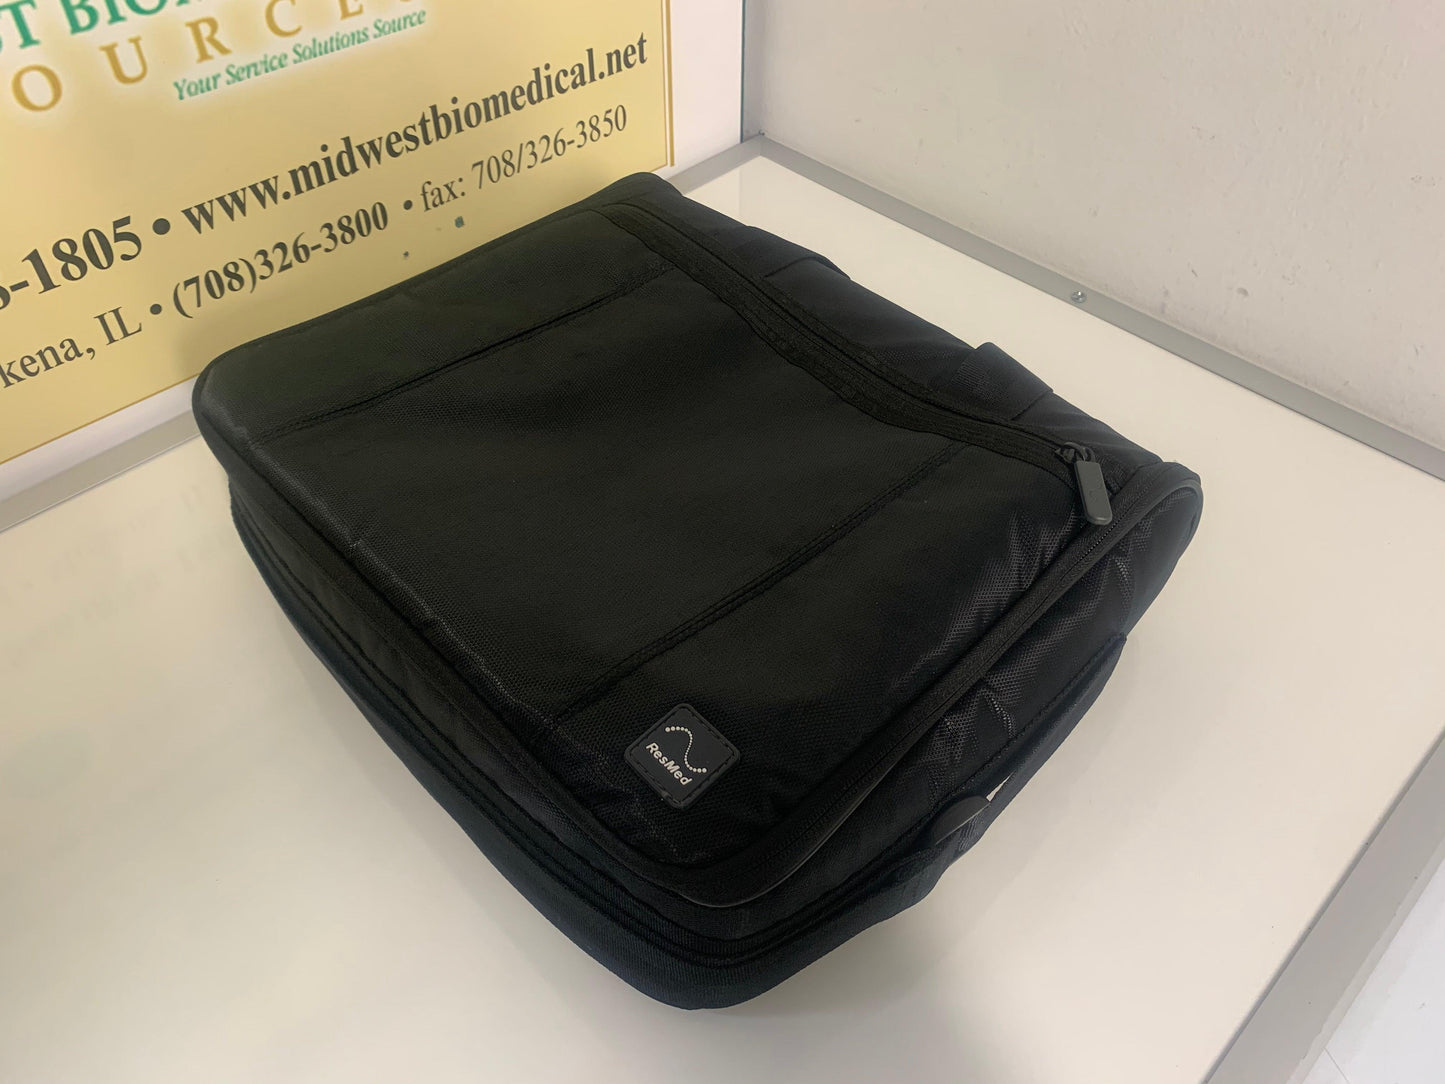 USED ResMed Astral Carrying Case with Shoulder Strap 27003BAG with Free Shipping & Warranty - MBR Medicals